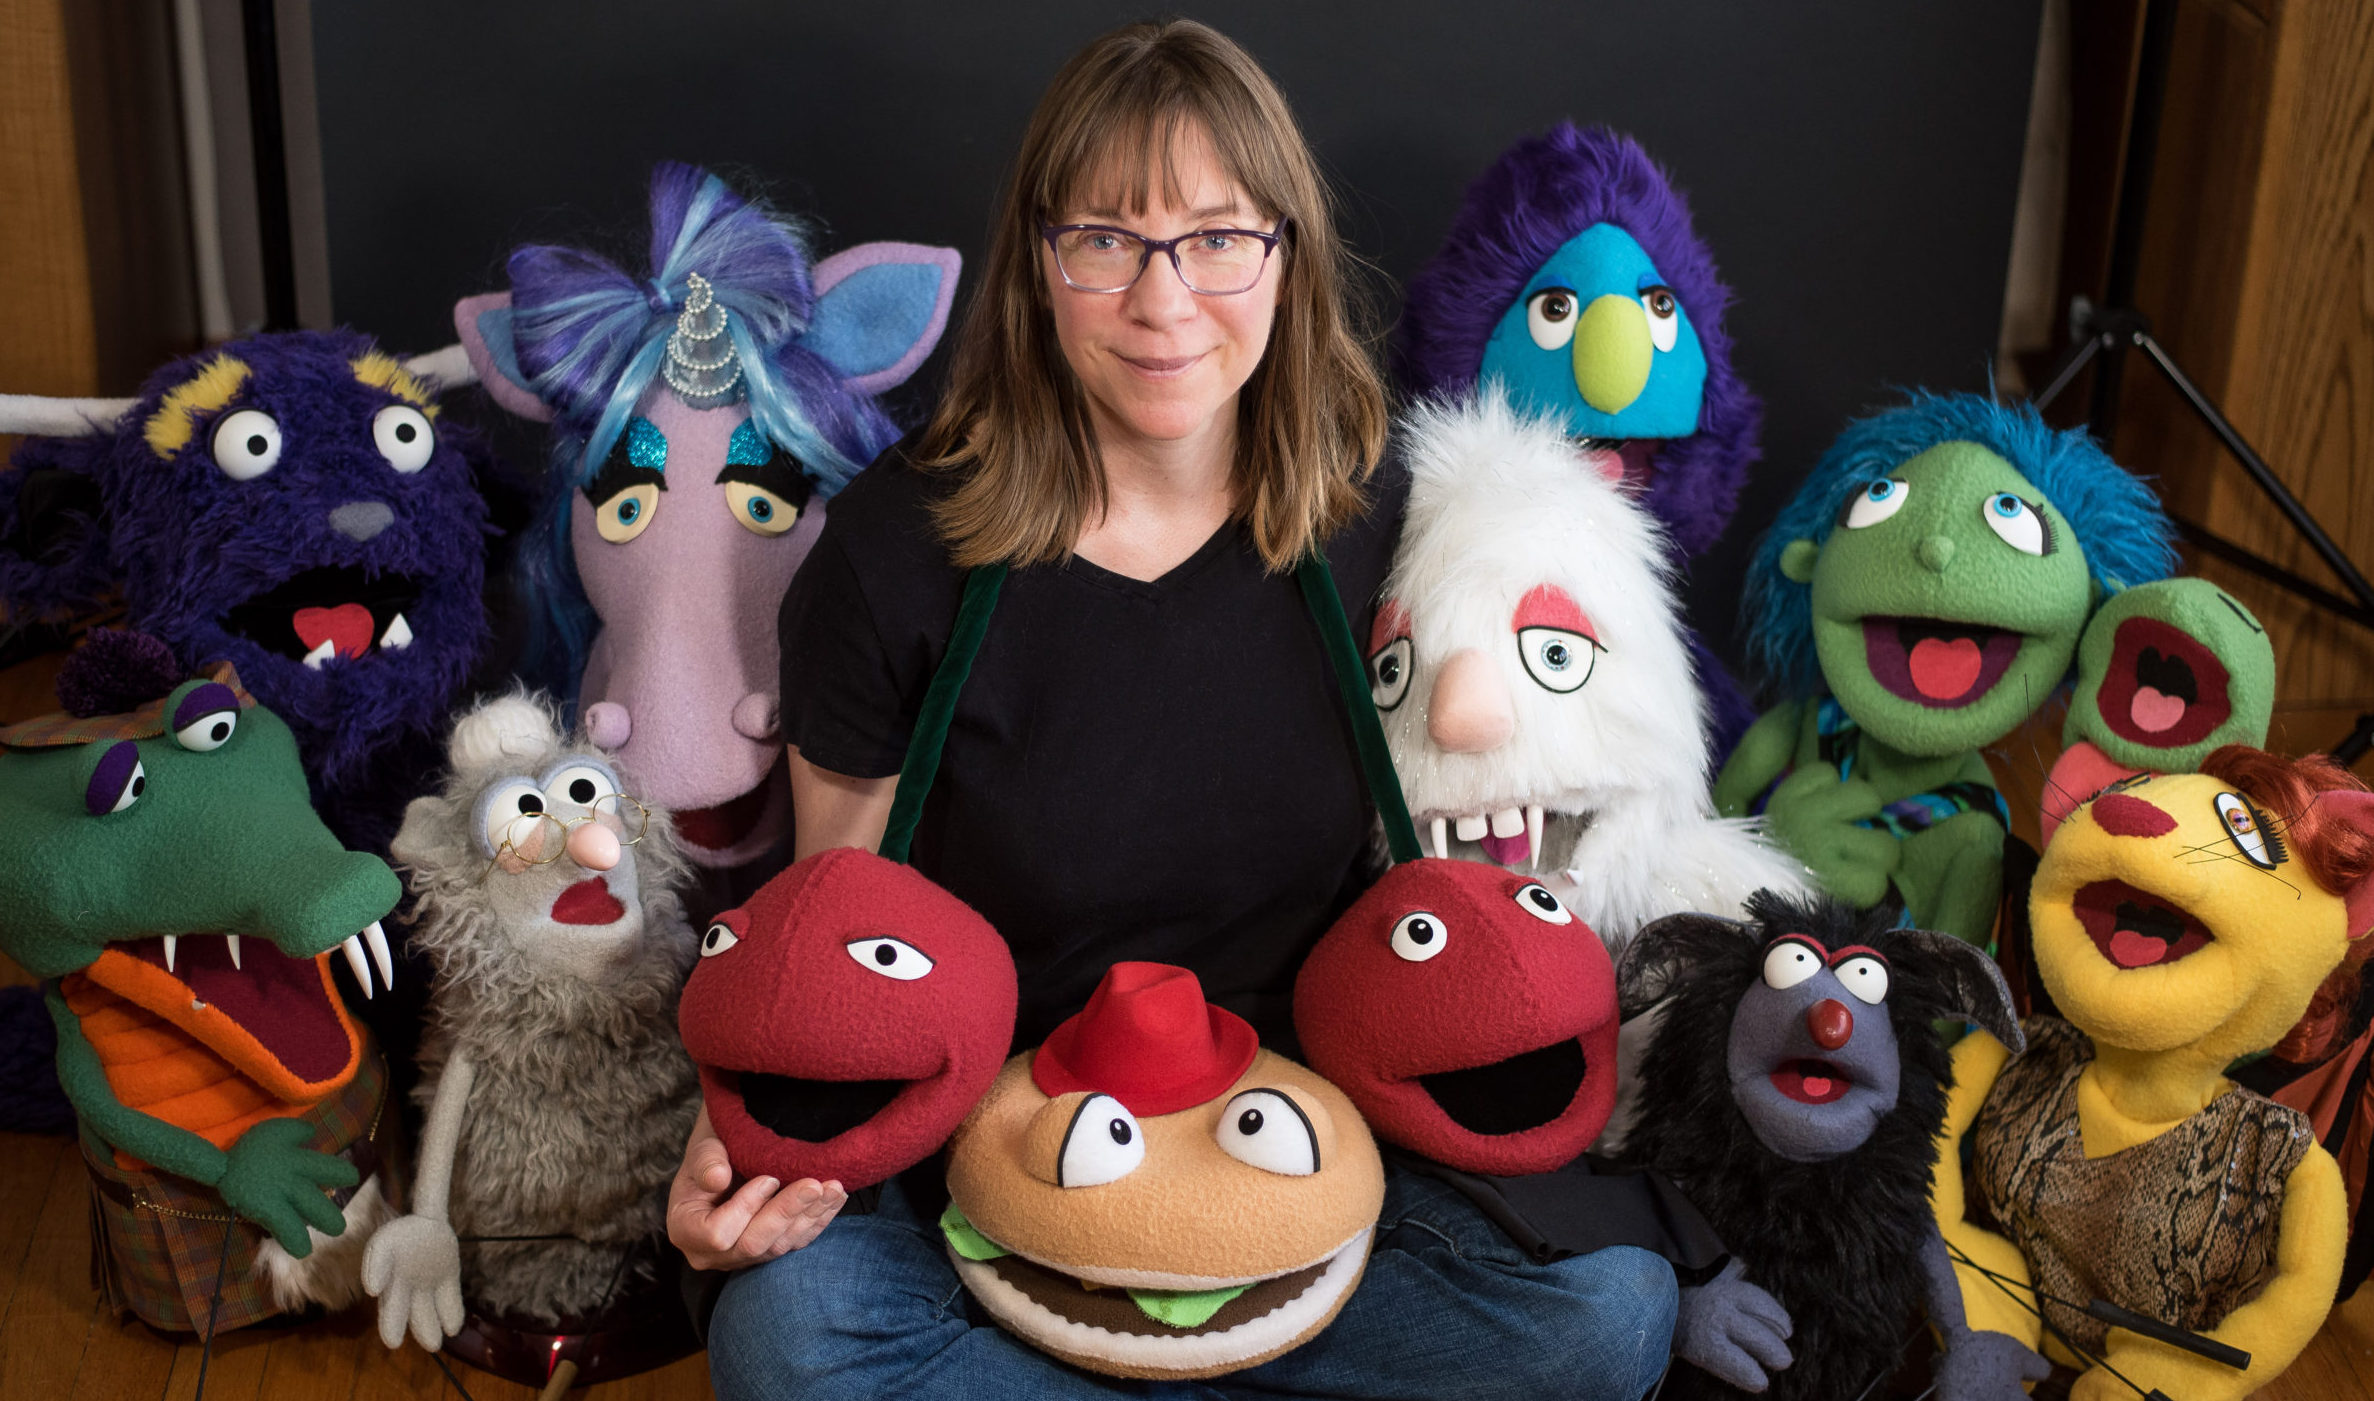 Laurie surrounded by a group of puppets